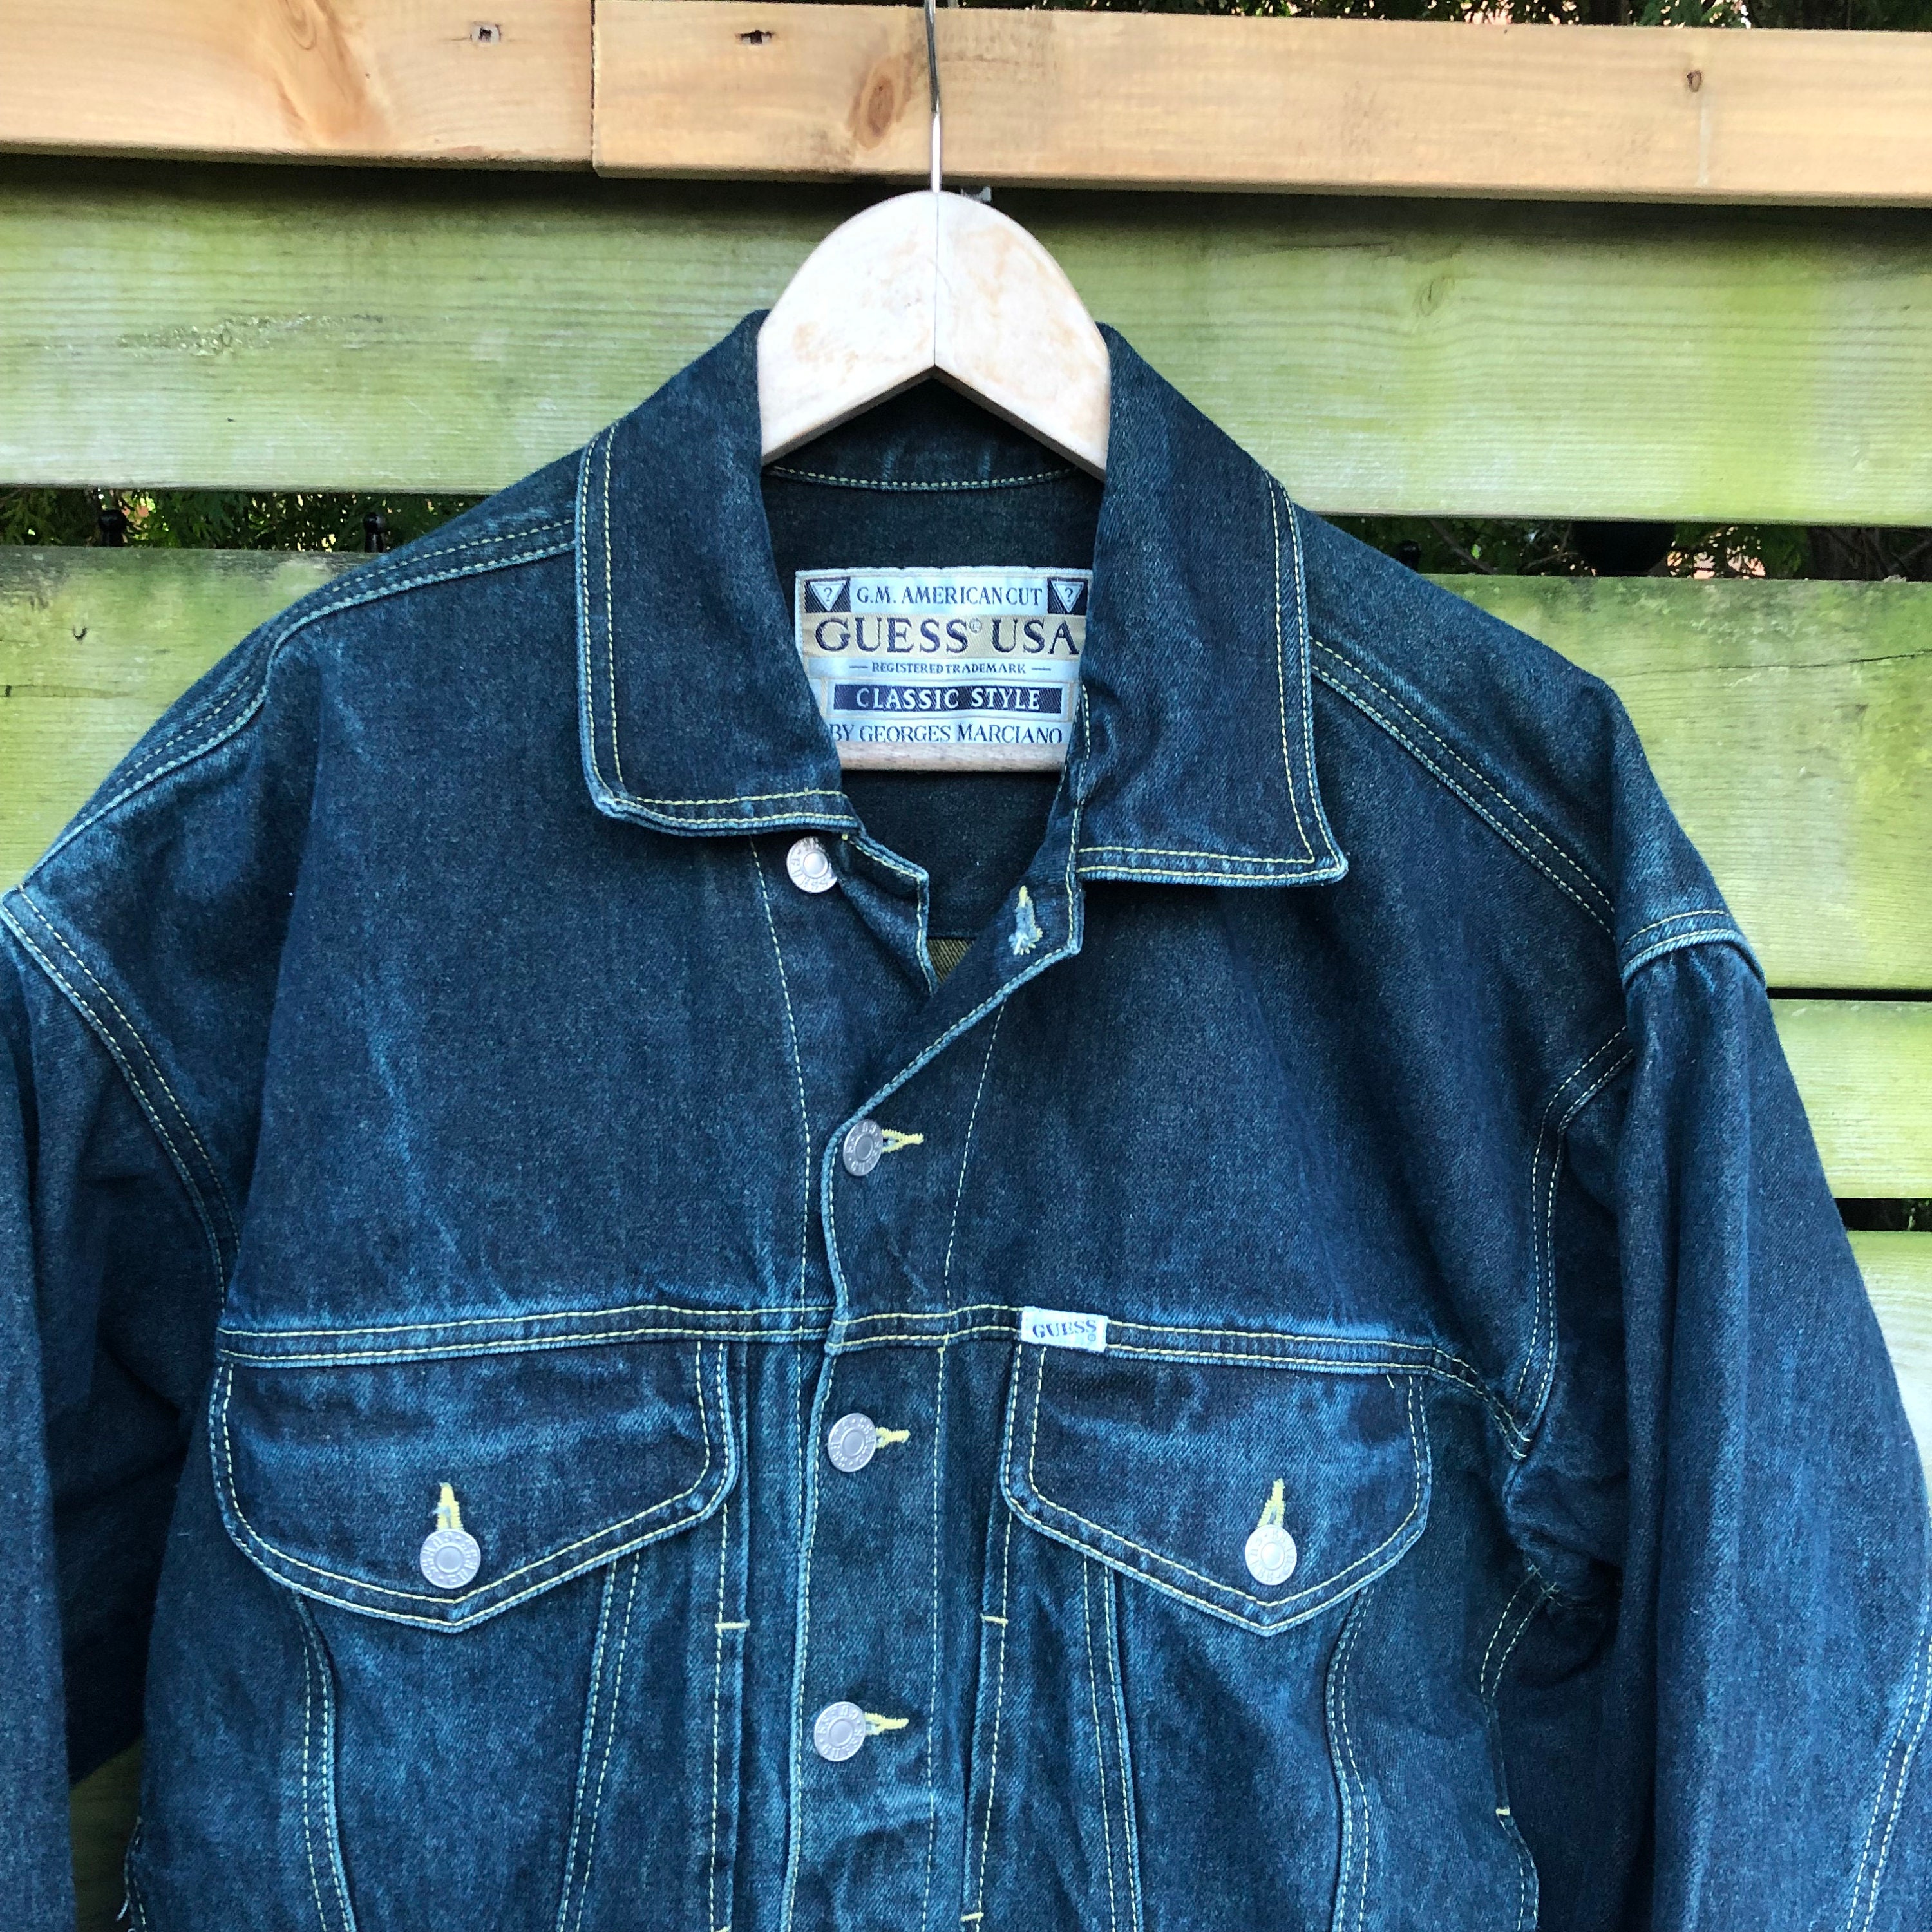 Vintage Guess Denim Jean Jacket Leather Accents Lined Made USA 70s Baby  Size 3 Y